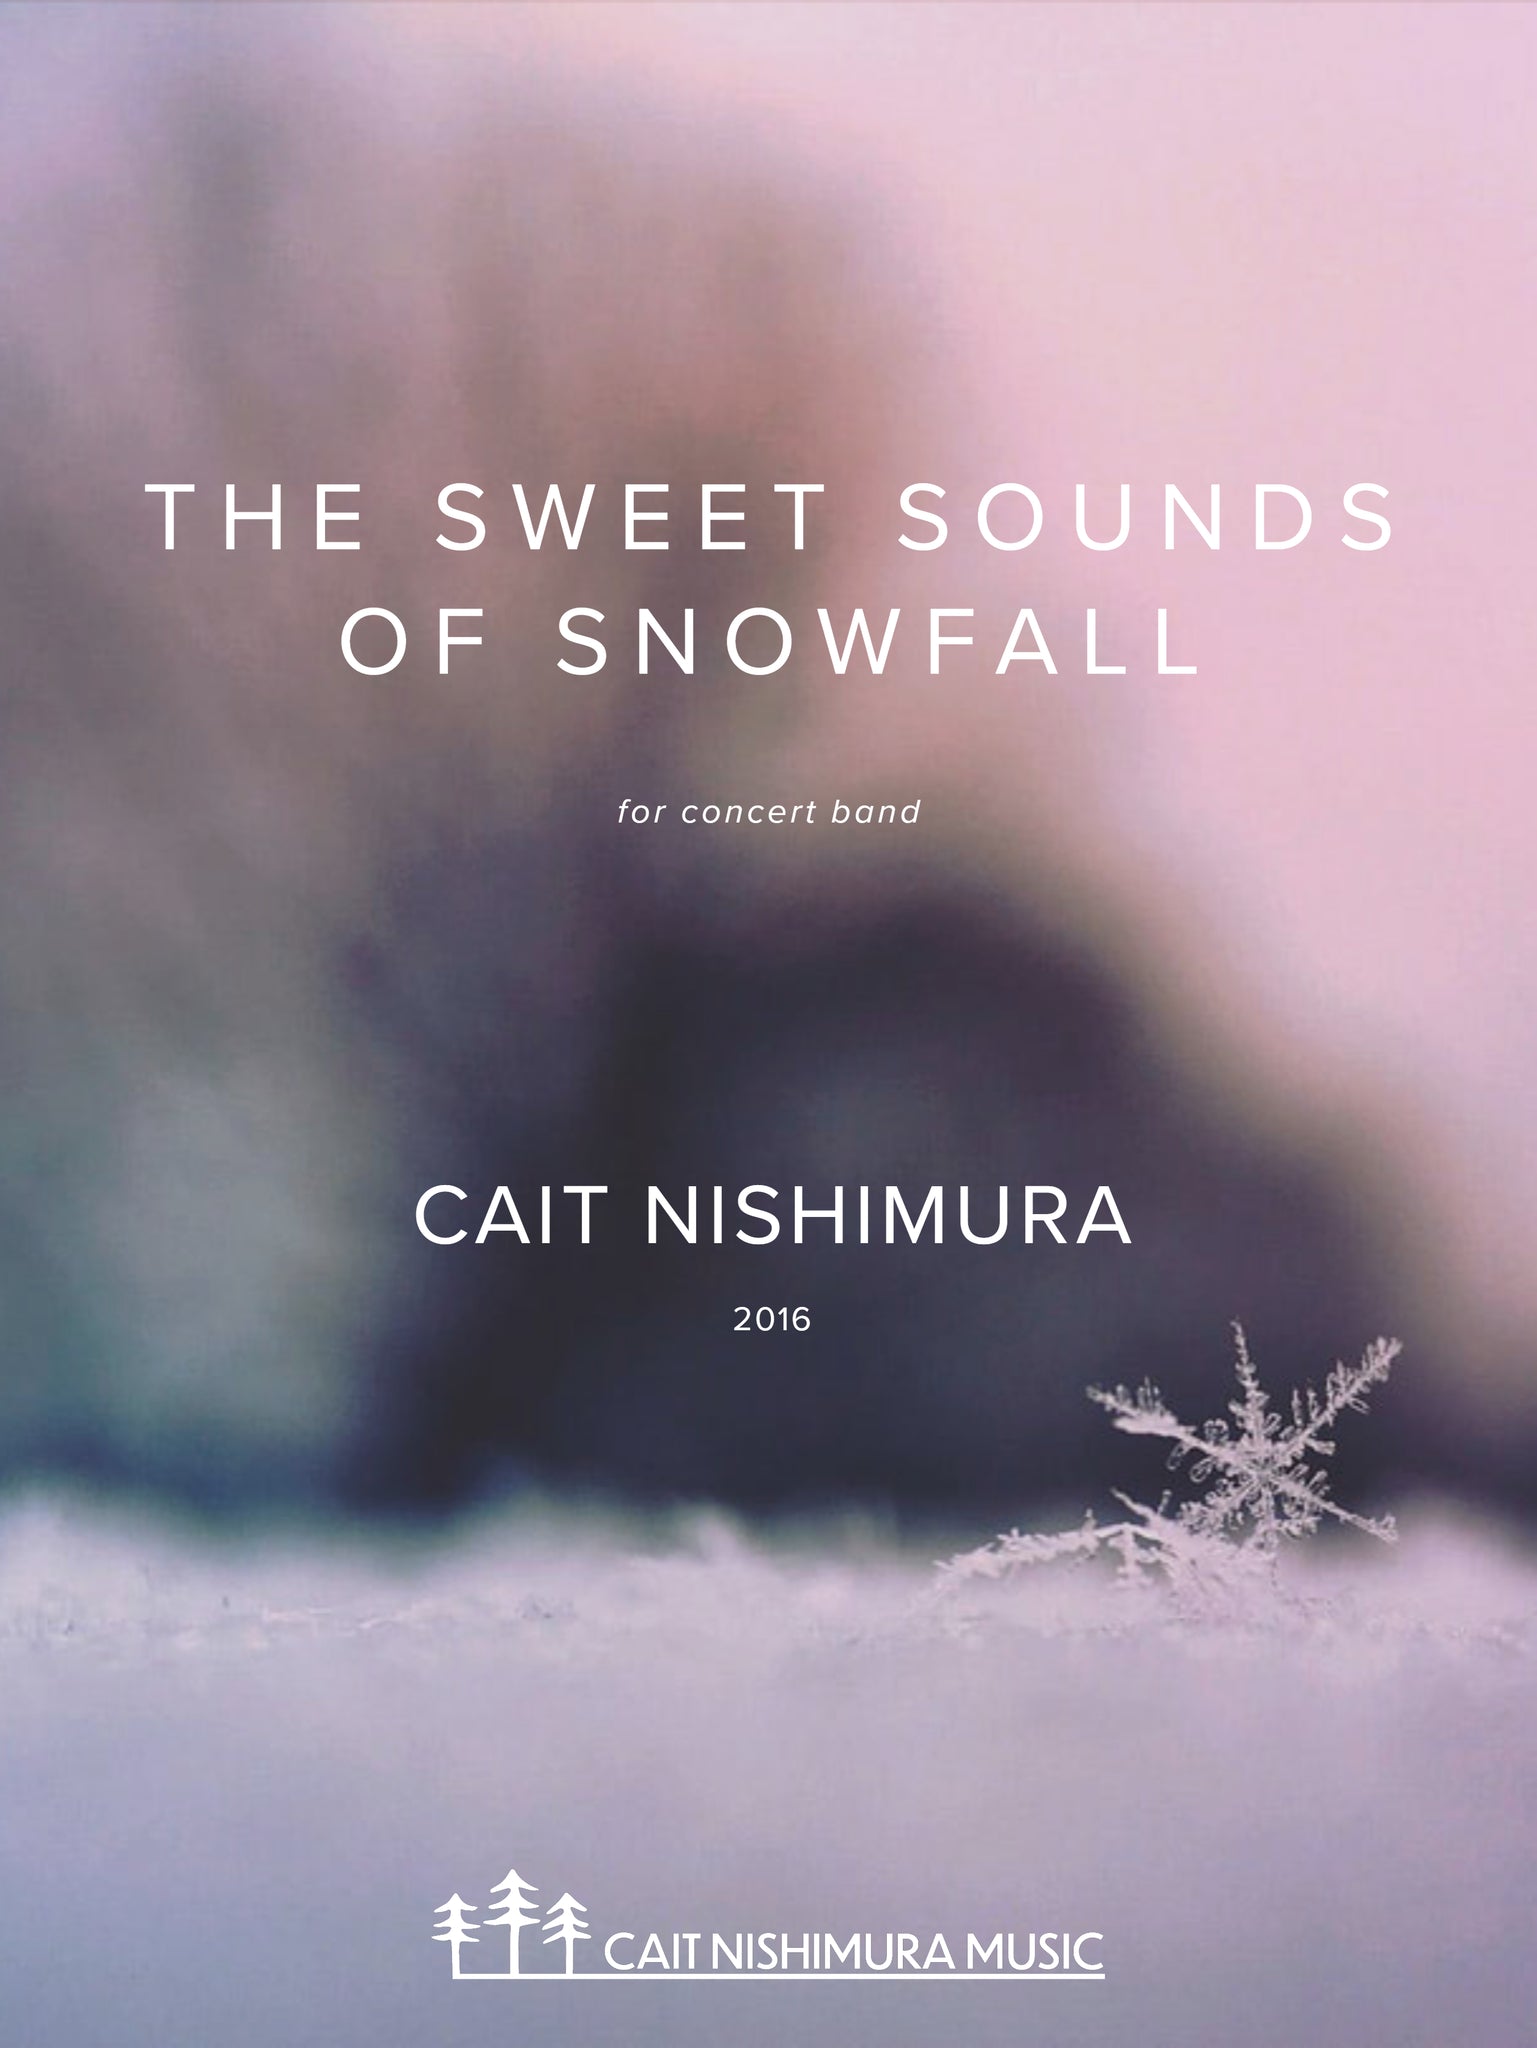 THE SWEET SOUNDS OF SNOWFALL